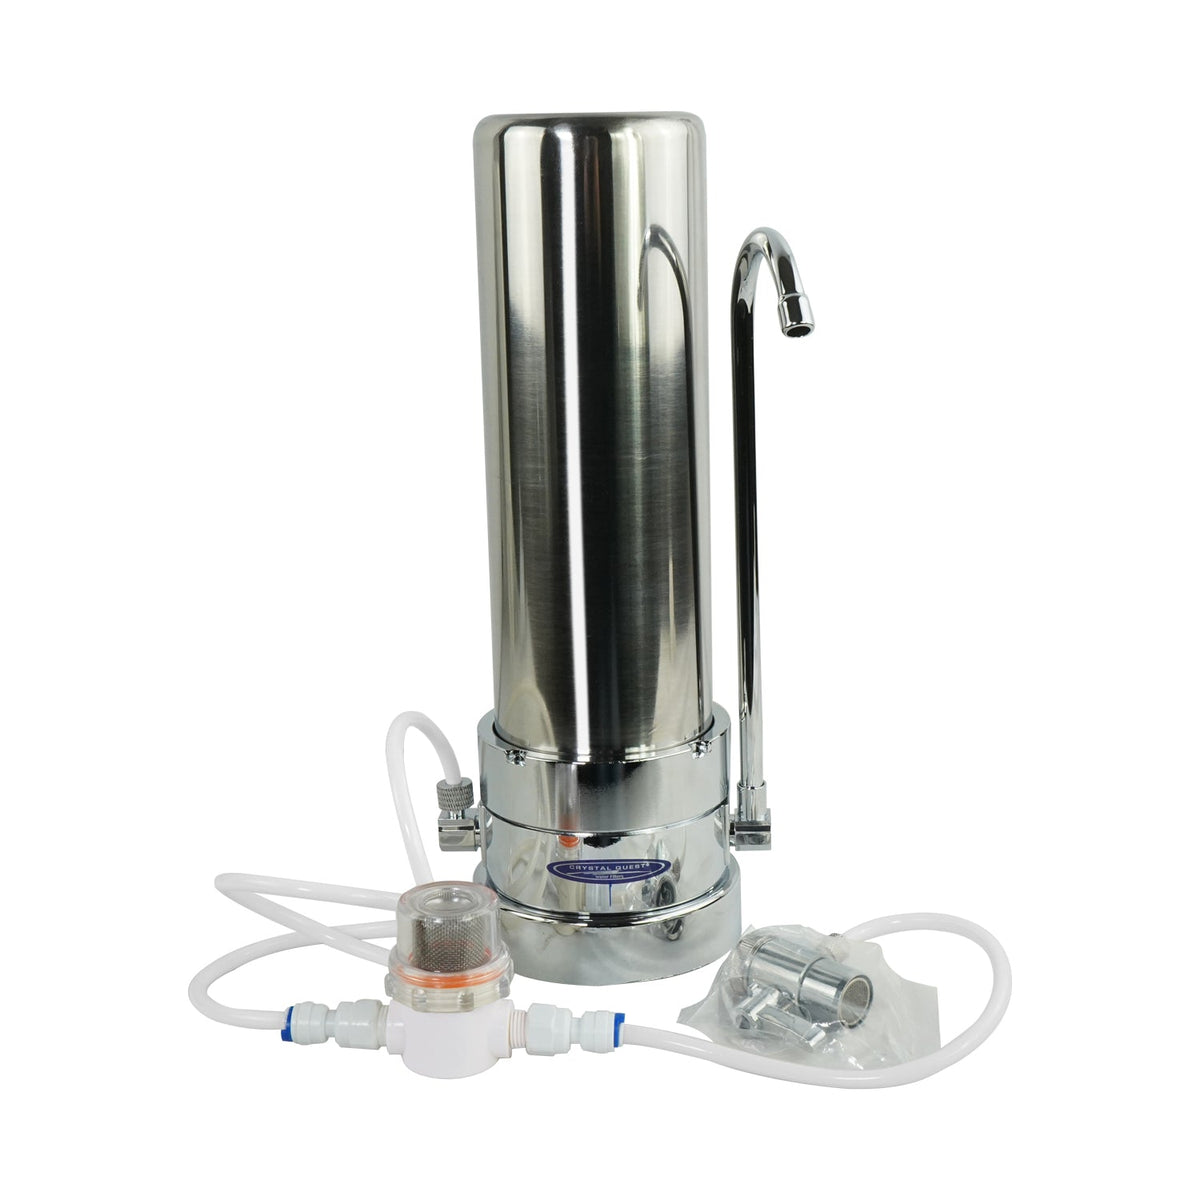 Arsenic Countertop Water Filter System - Countertop Water Filters - Crystal Quest